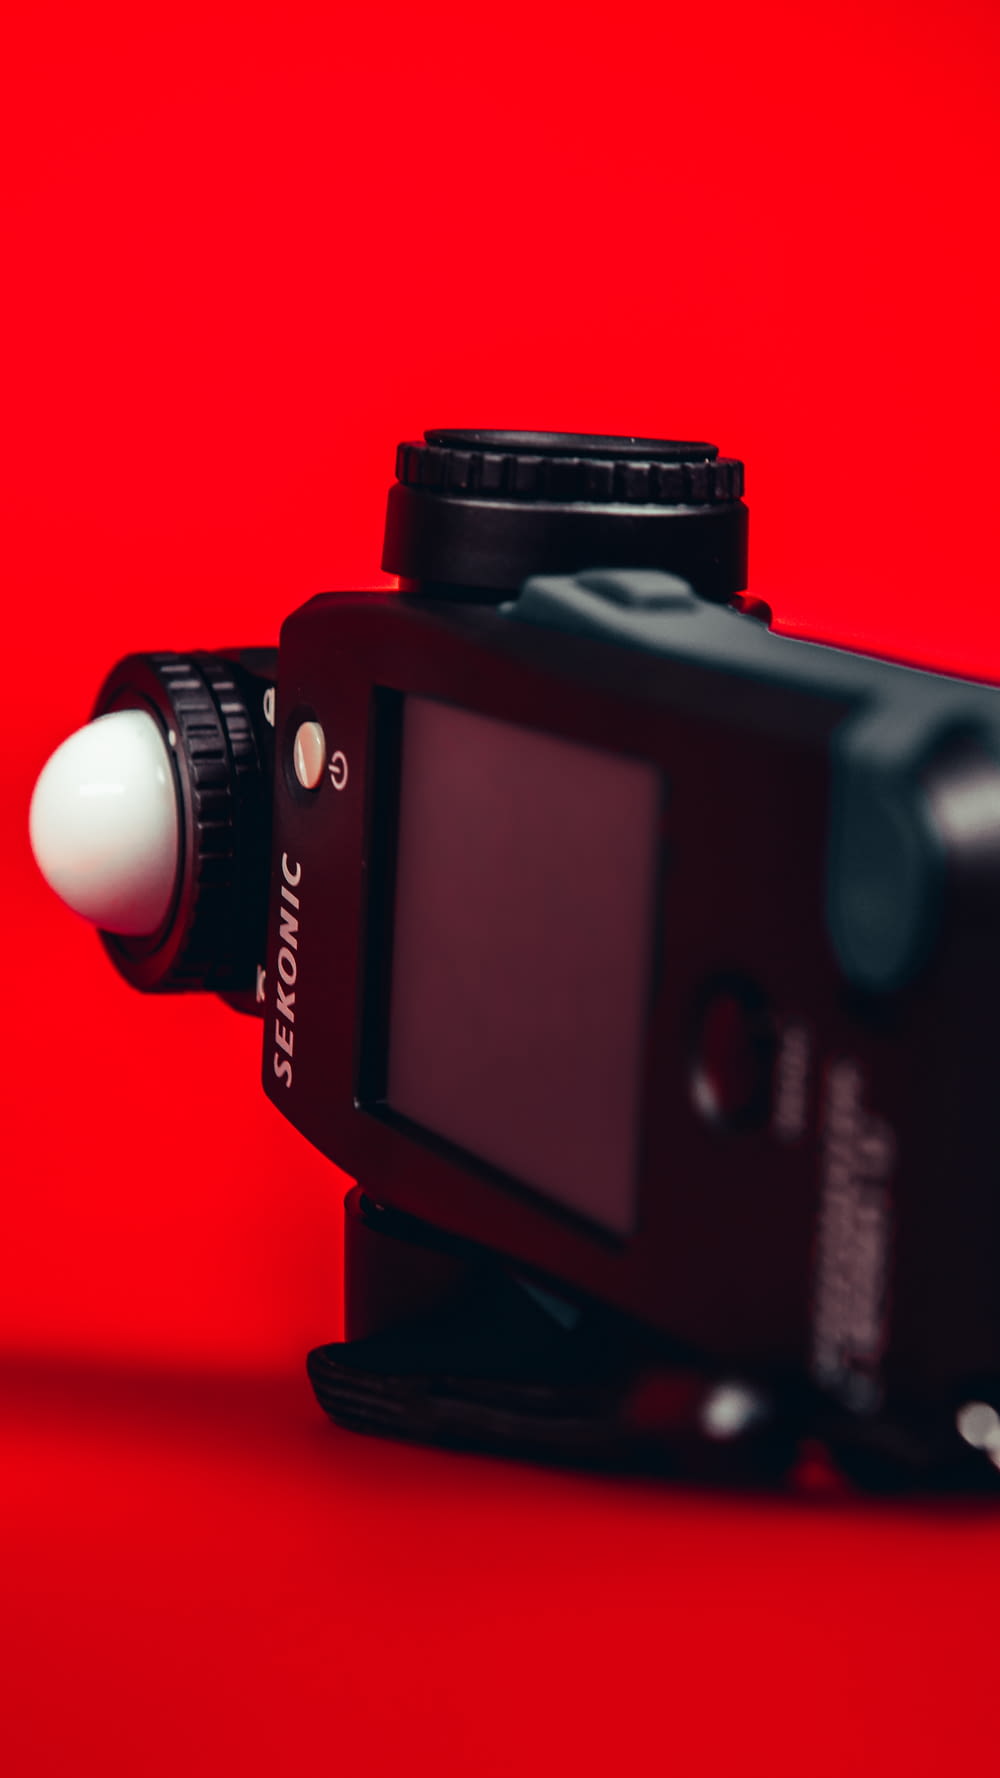 black canon dslr camera on red surface